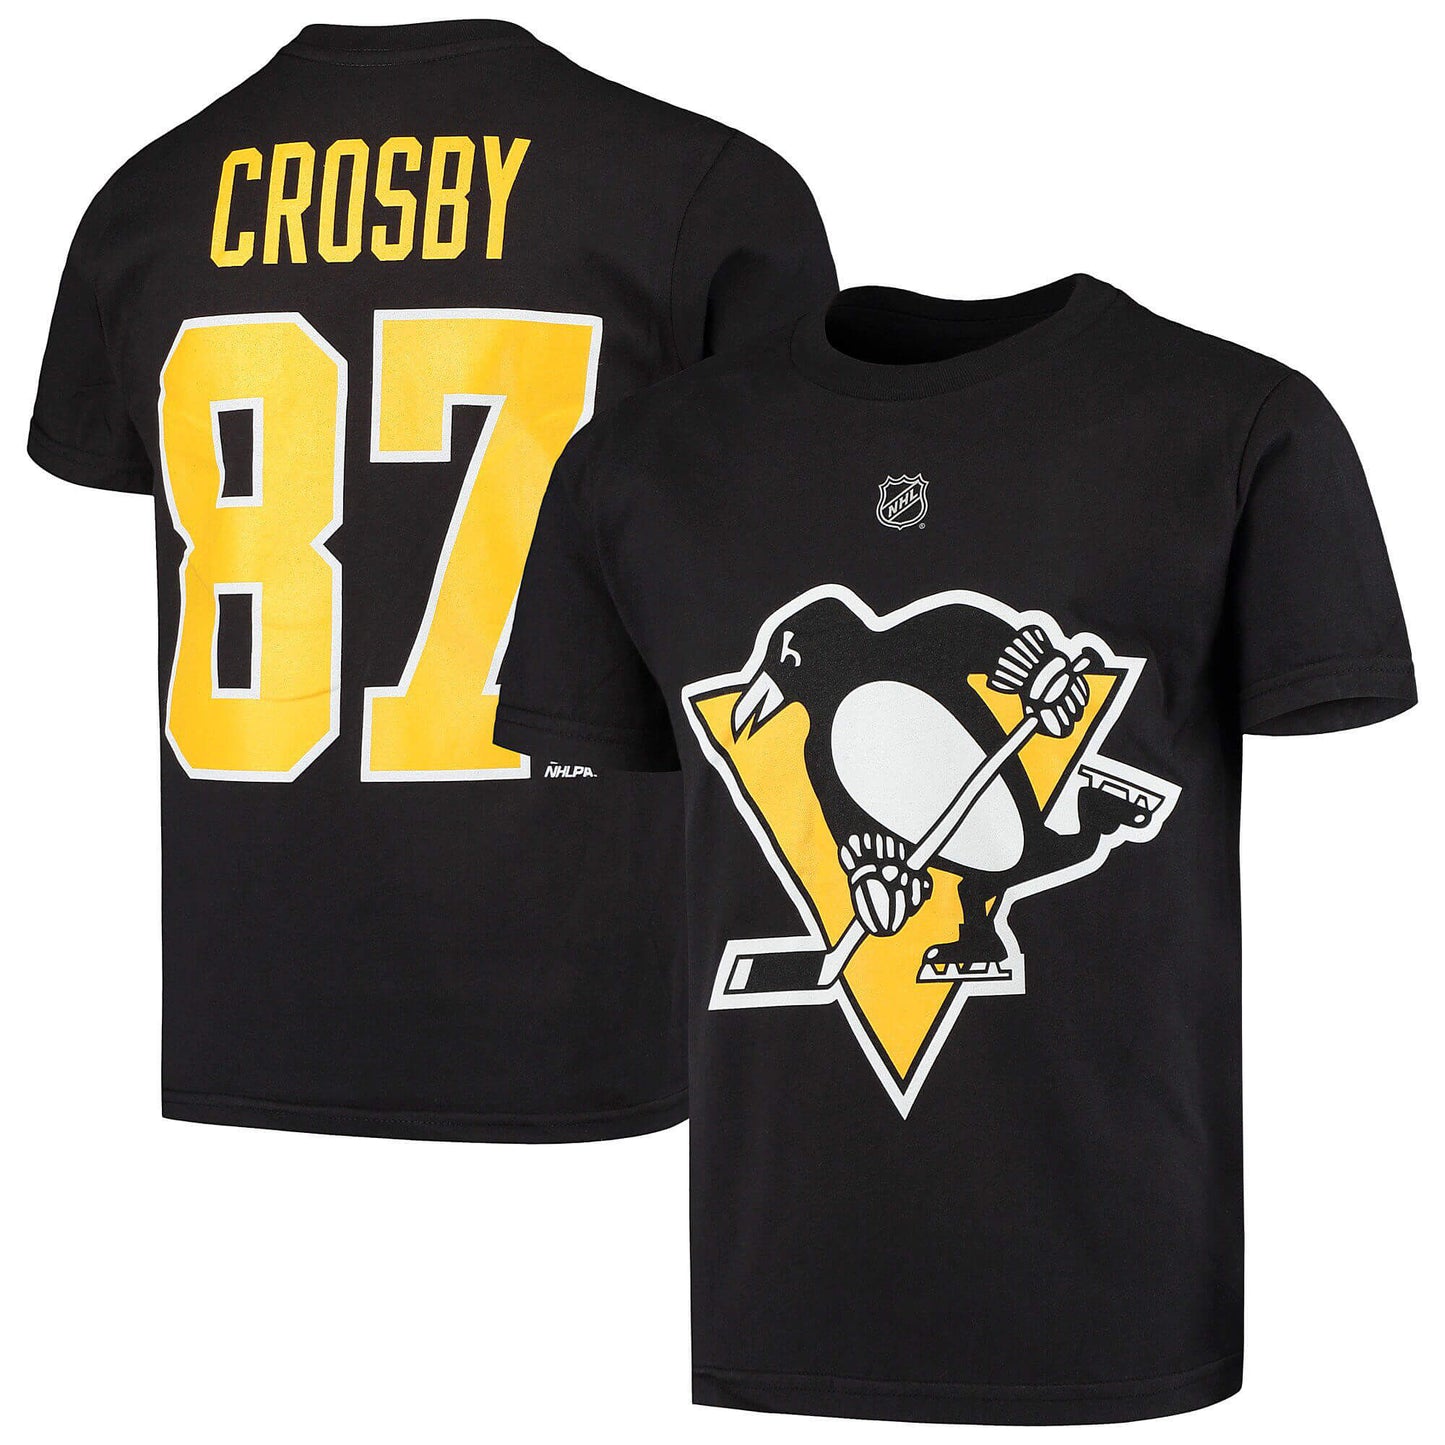 Outer Stuff Nhl Name And Number Ss Tee Pittsburgh Penguins - Crosby Sidney Black